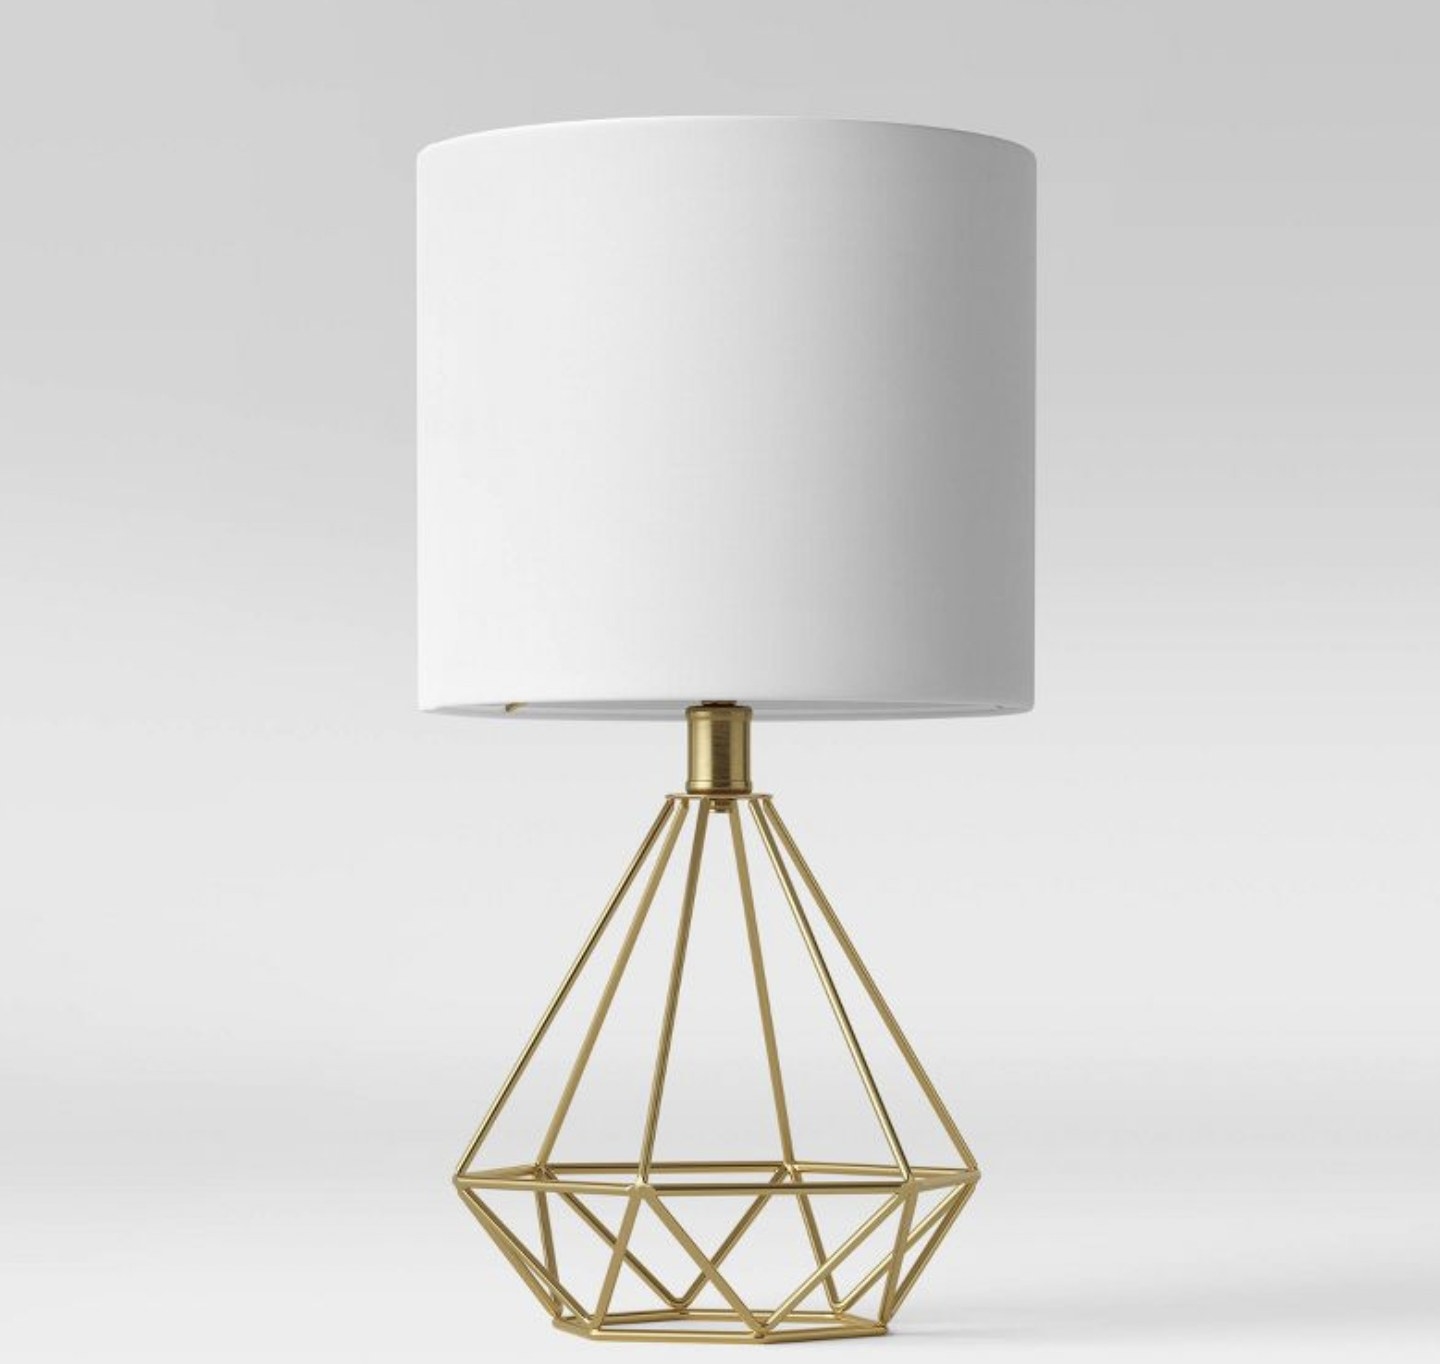 the brass geometric wire table lamp